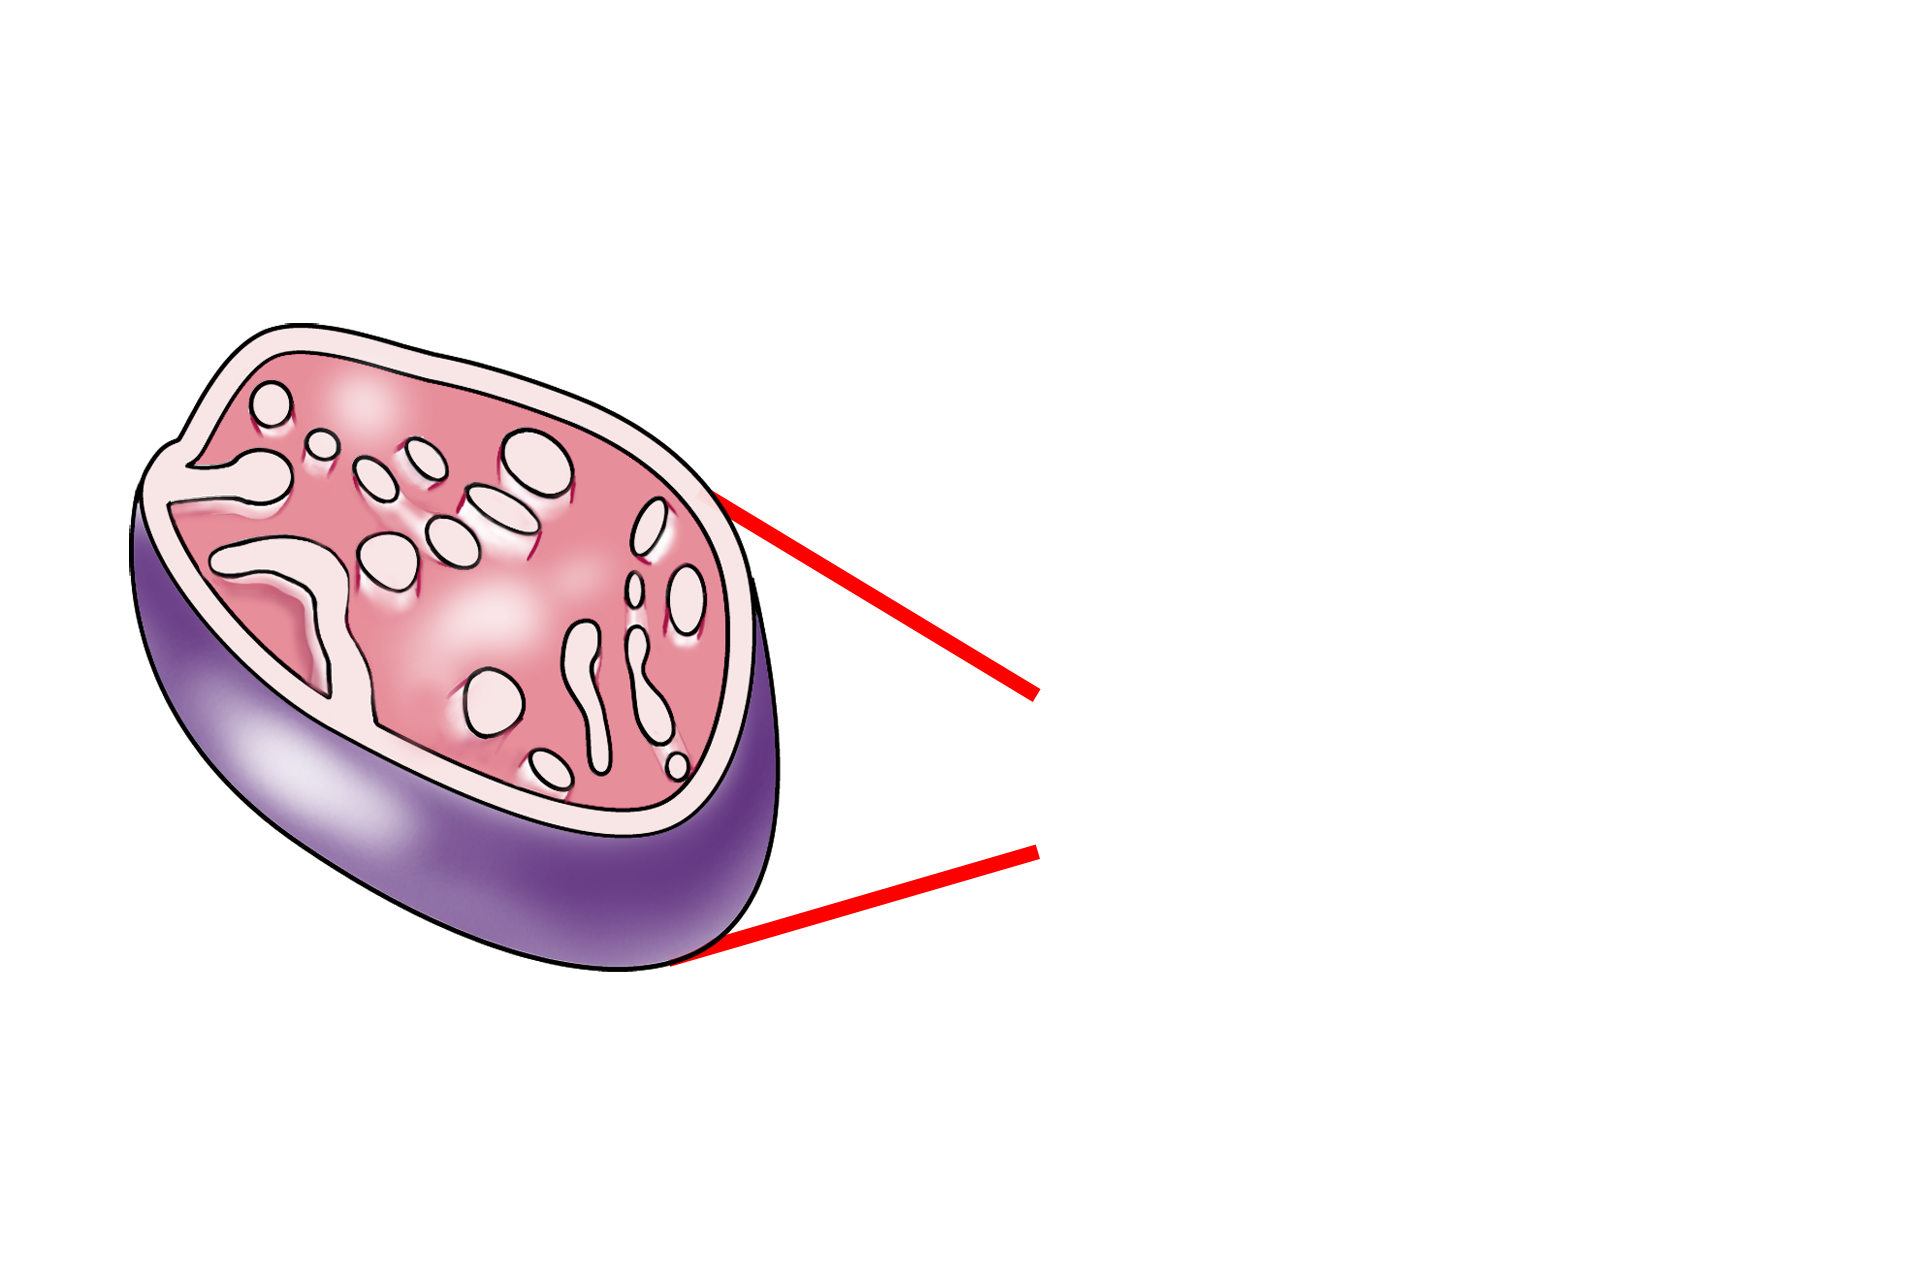 Illustration <p>The mitochondria present in this electron micrograph possess tubular cristae rather than the flattened shelf-like cristae which are present in most cells.  Mitochondria with tubular cristae are a common feature of most steroid-producing cells.  40,000x</p>
